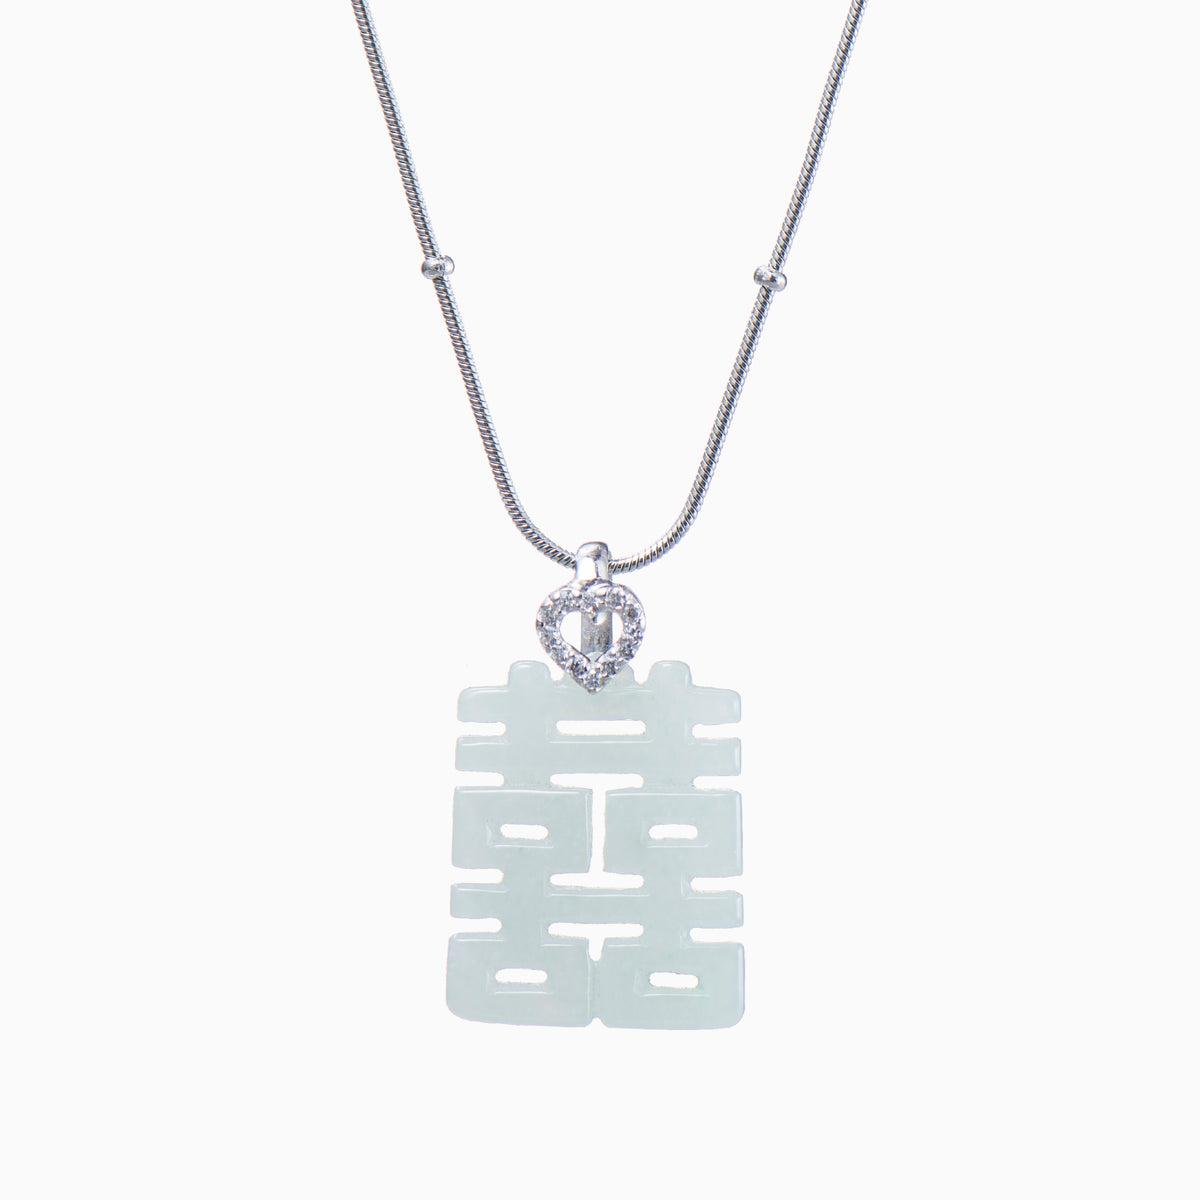 White jade pendant in traditional Chinese design